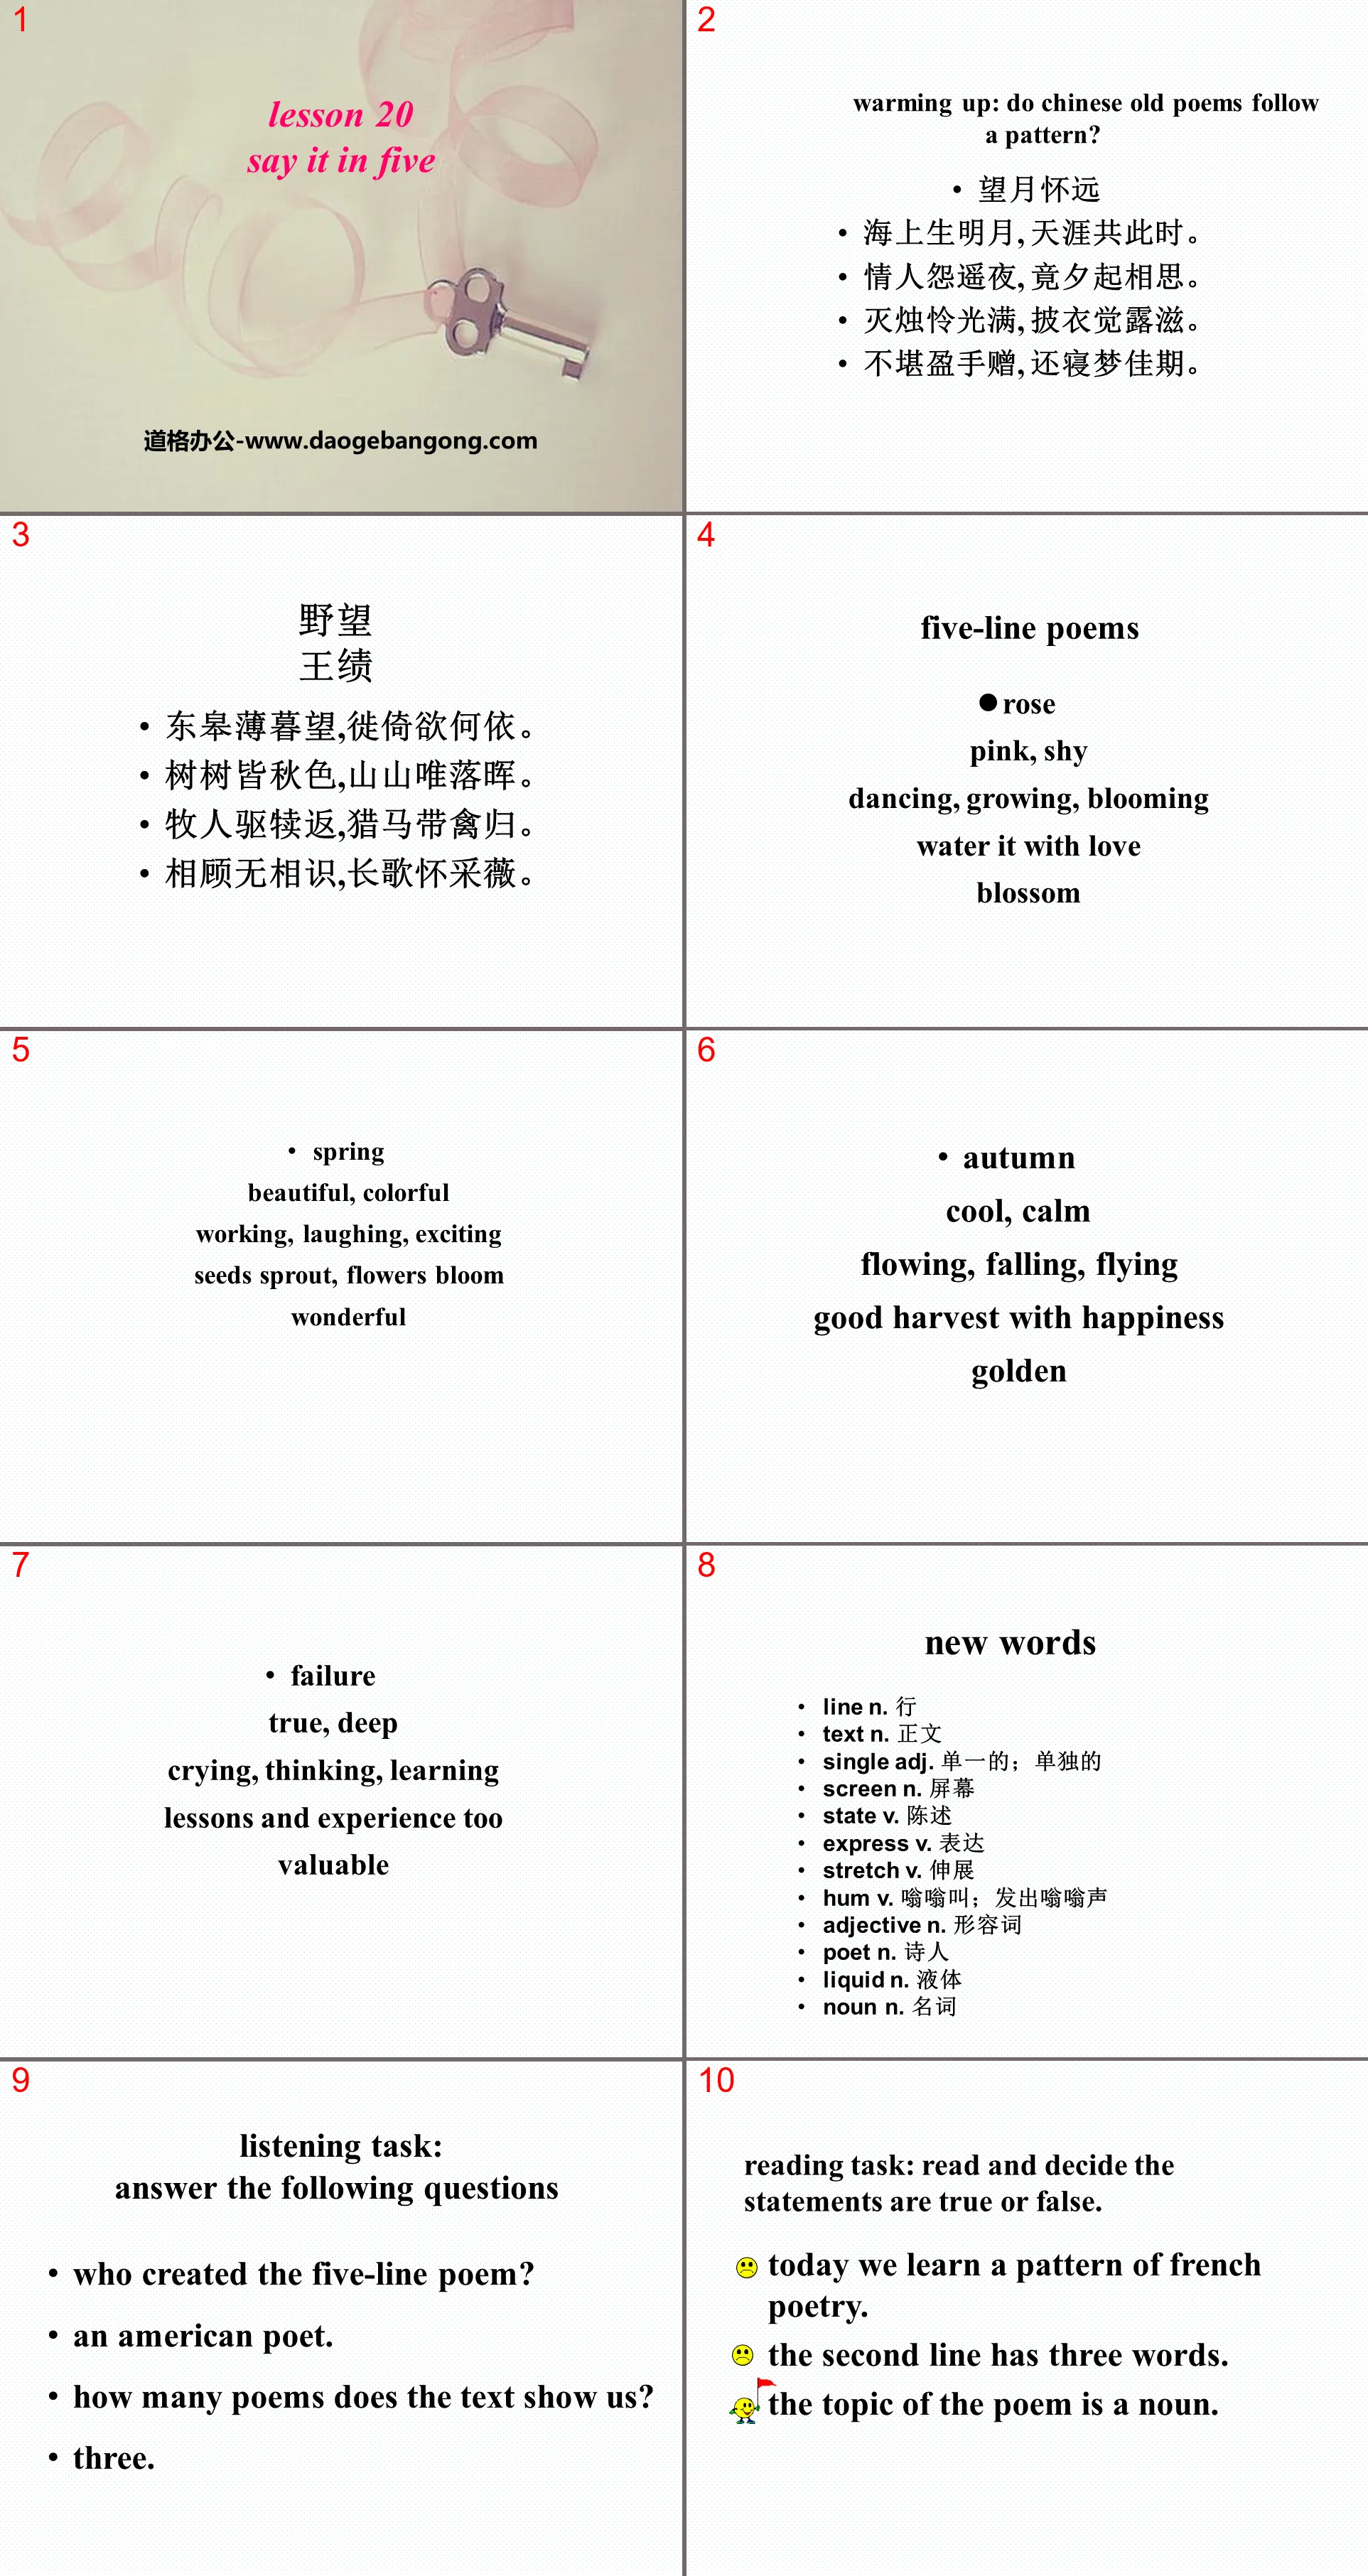 《Say It in Five》Stories and Poems PPT课件下载
